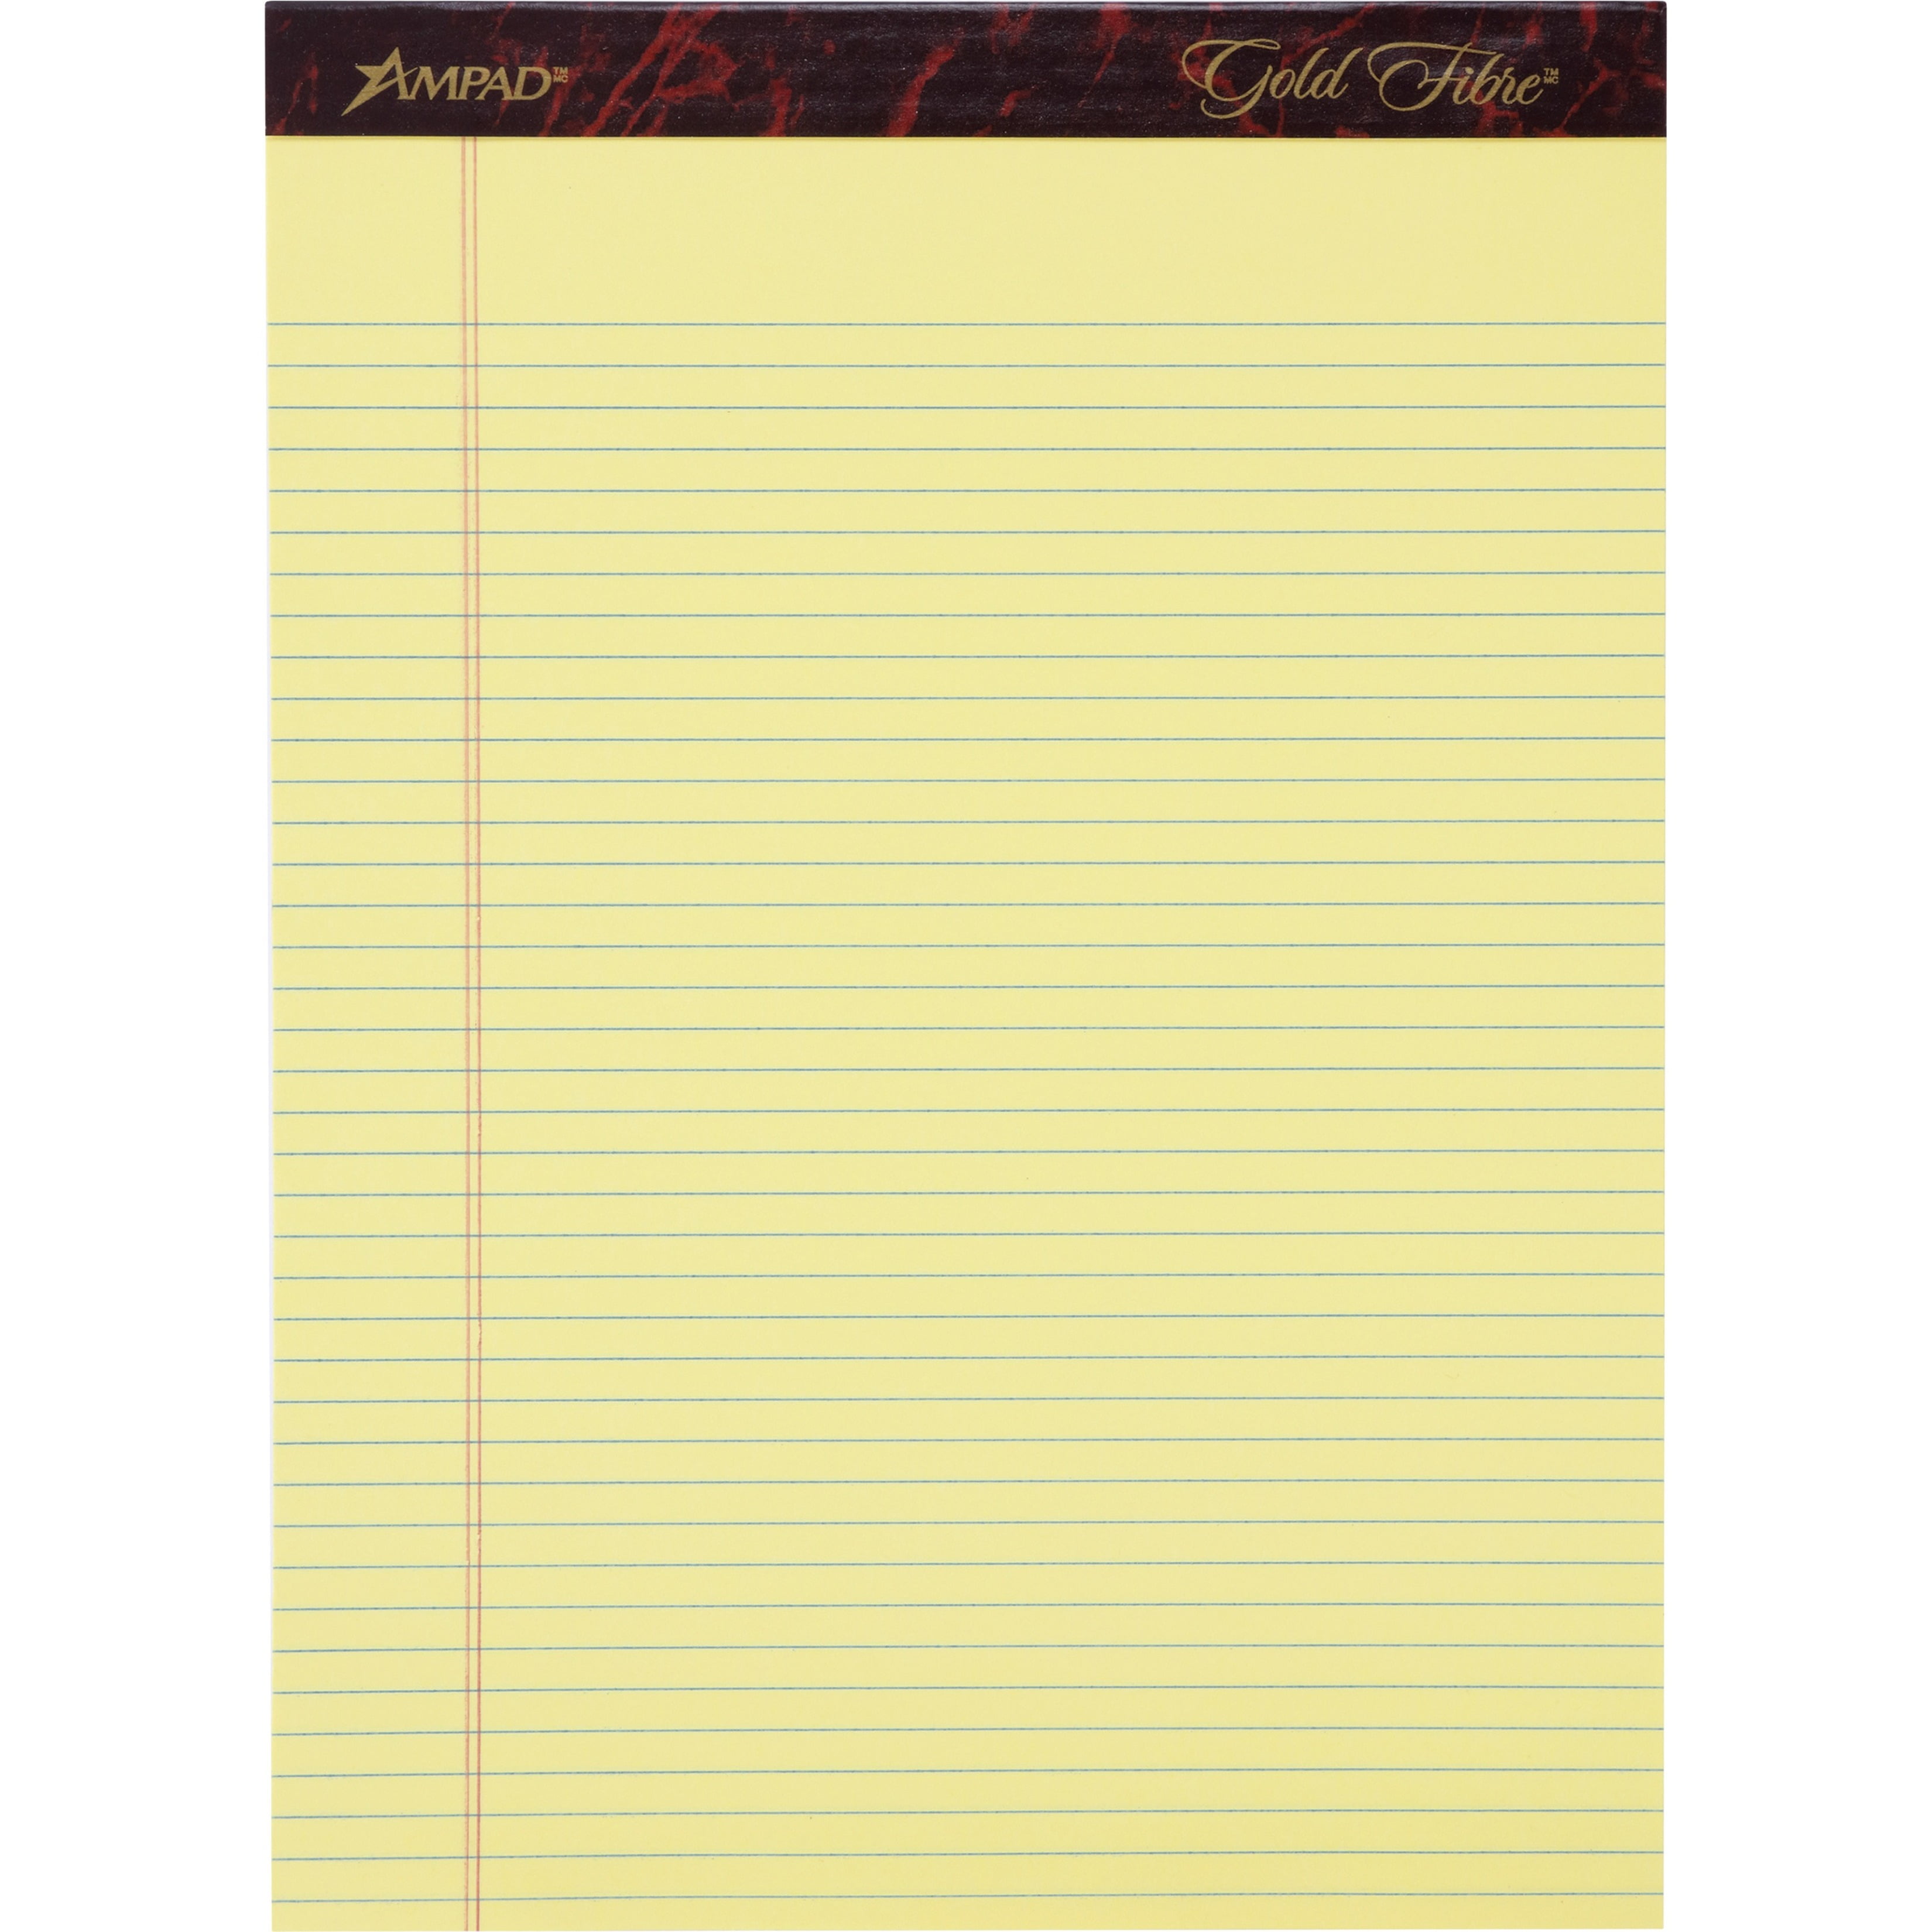 Ampad Gold Fibre Retro Notepad 8.5" x 11.75" Wide Ruled Ivory 652537 